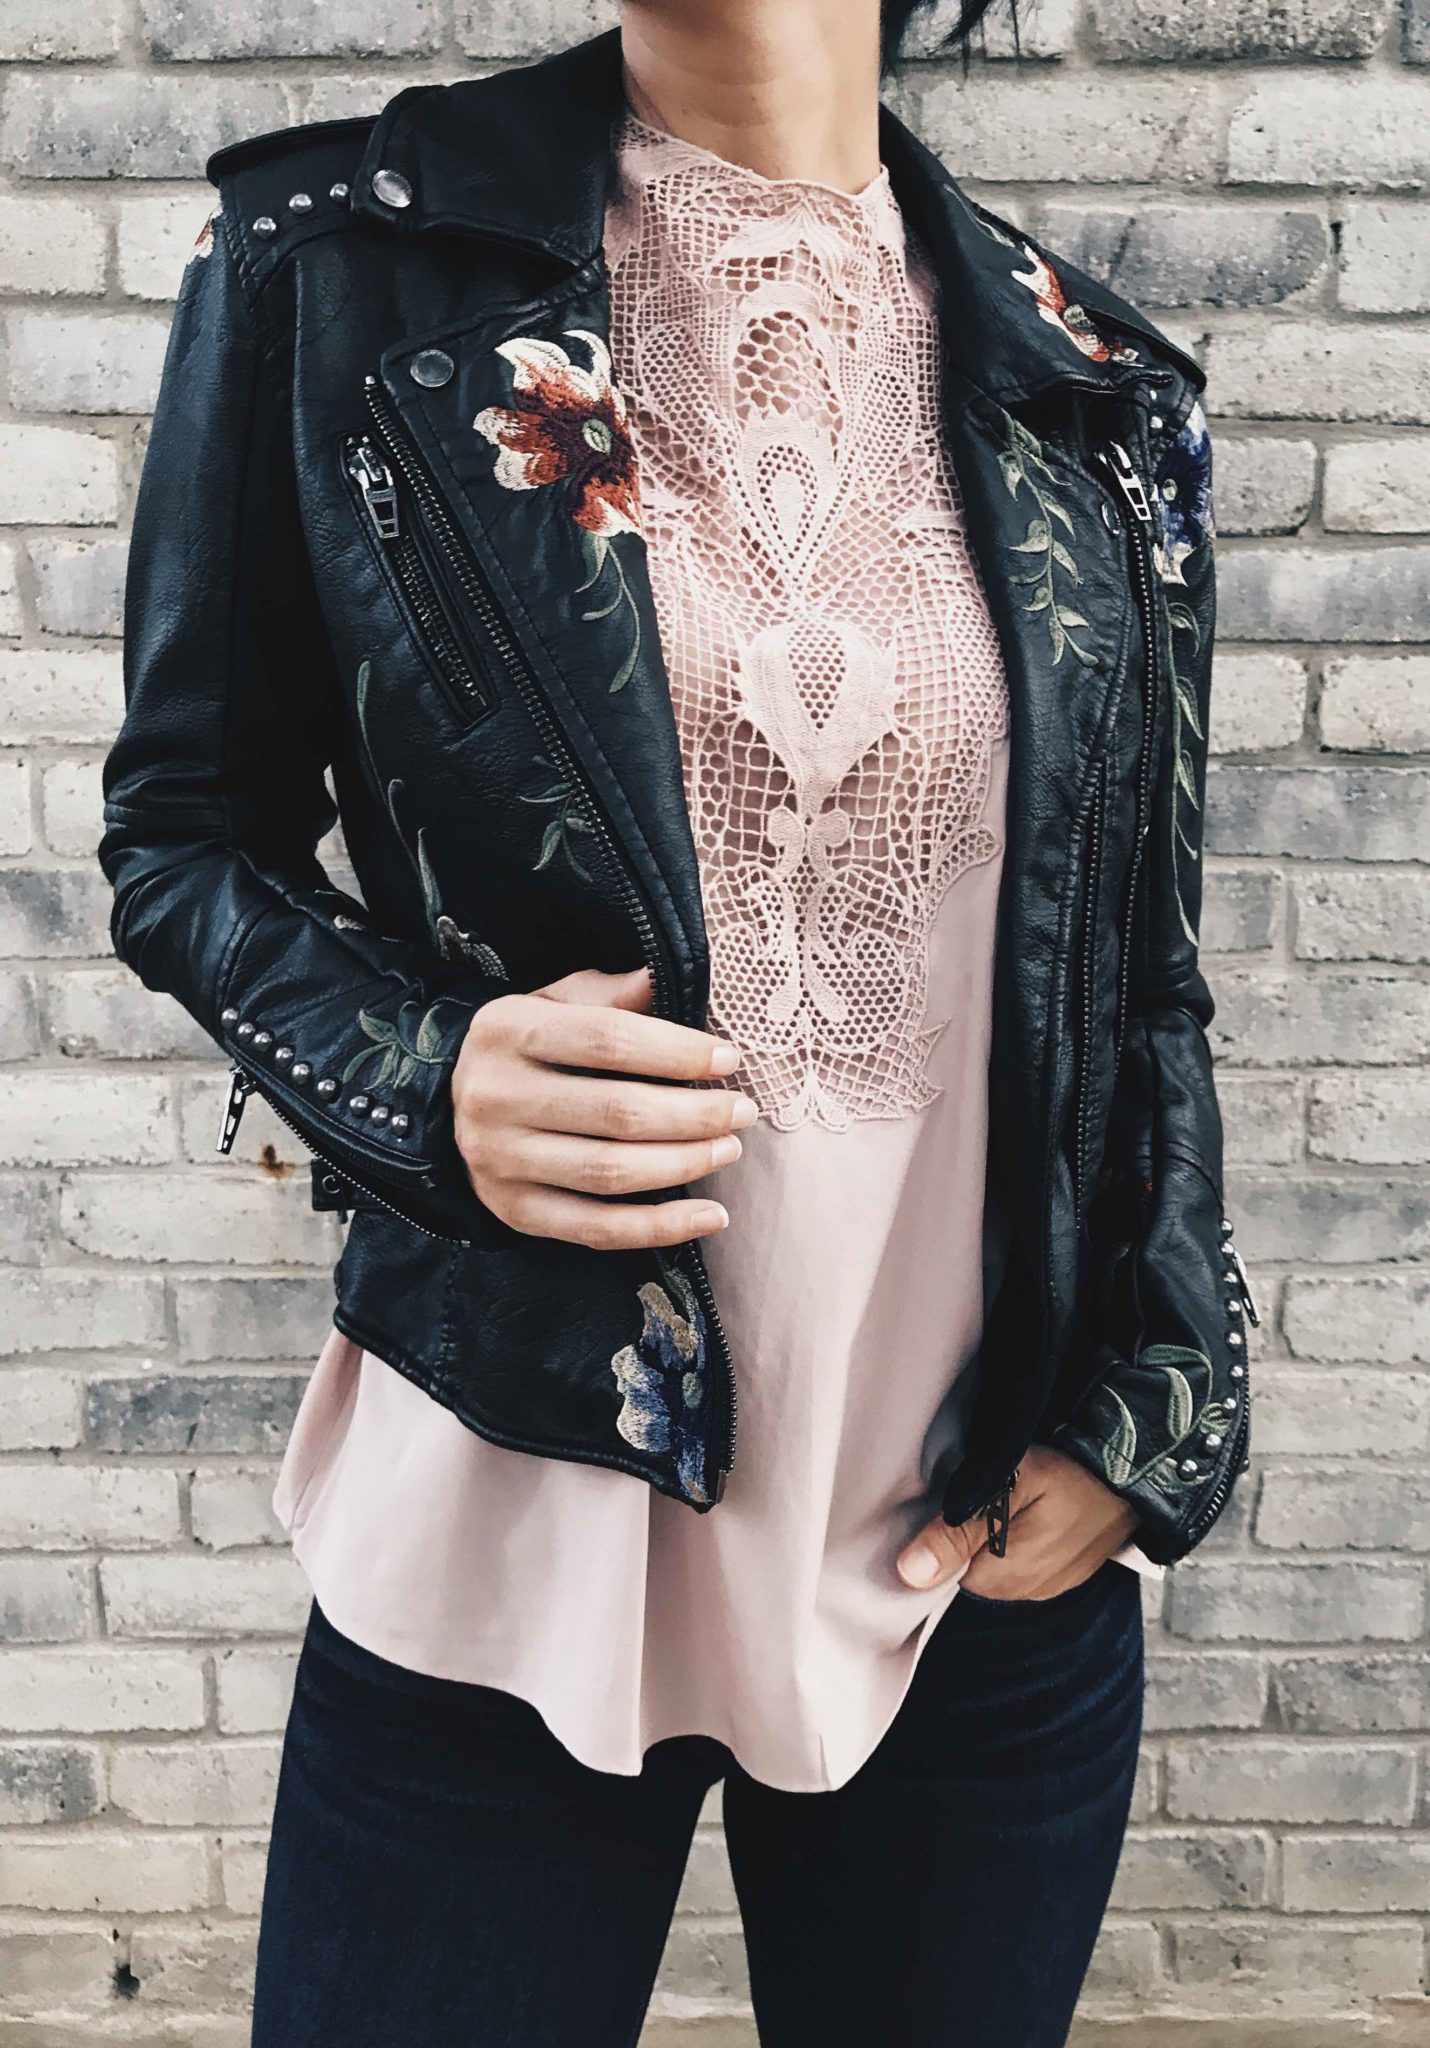 DTKAustin is sharing her top must-have pieces from the 2017 Nordstrom Anniversary Sale. This floral BlankNYC jacket is a Fall staple with this lace tank for layering. | nordstrom sale must haves | what to buy from the nordstrom anniversary sale || Dressed to Kill